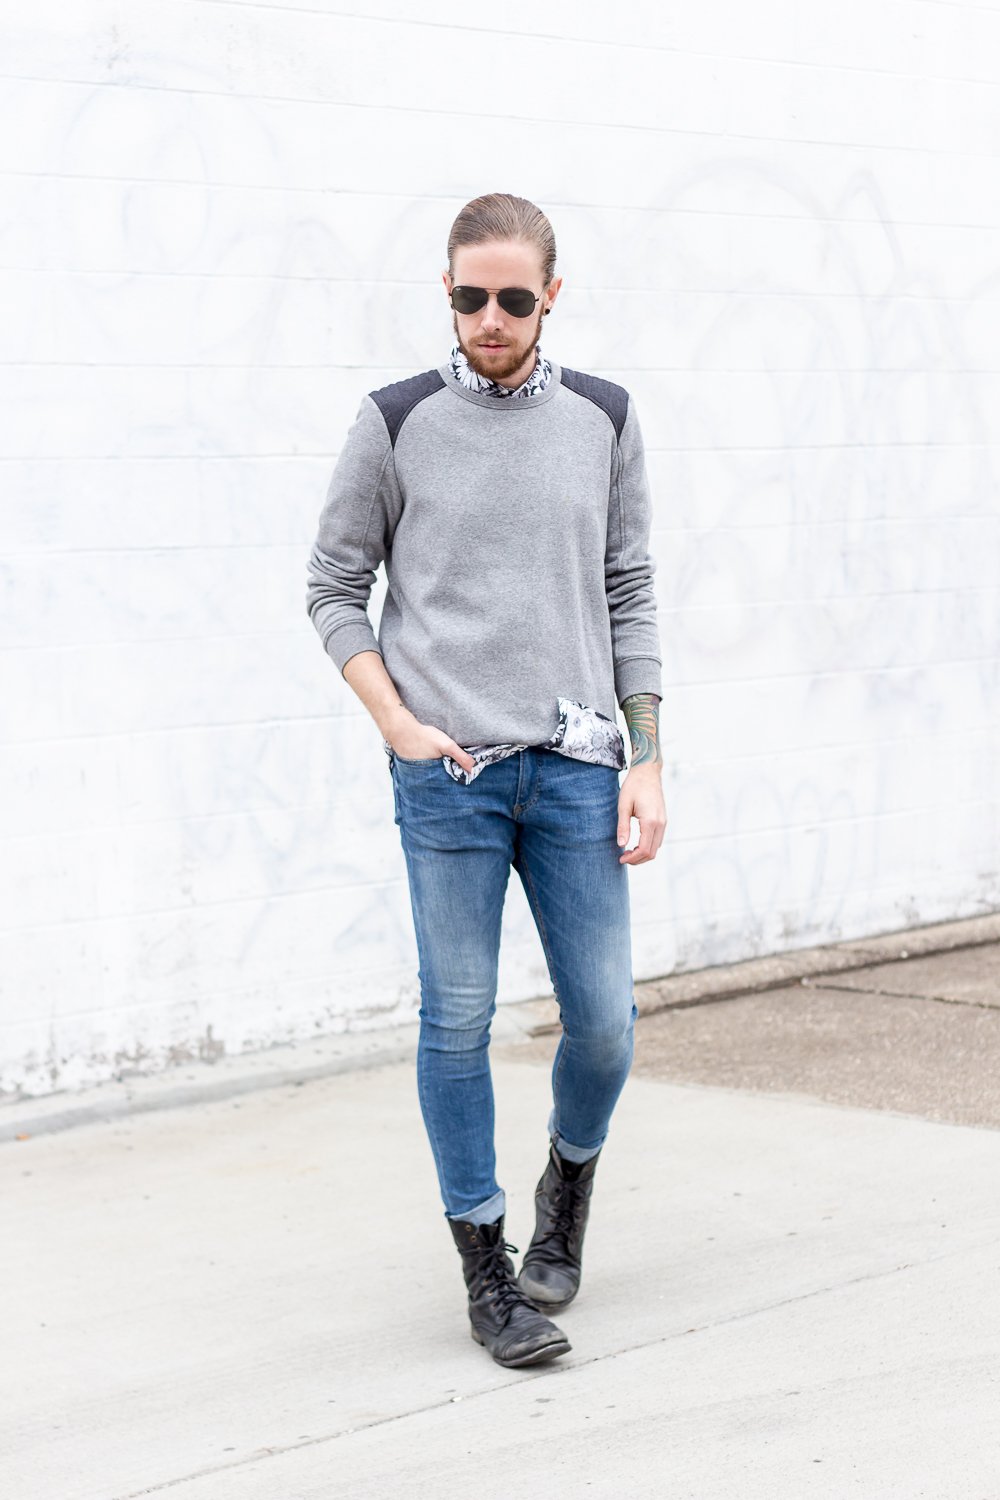 The Kentucky Gent, a Louisville, Kentucky men's life and style blogger, in Topman Floral Shirt, H&M Sweatshirt, H&M Skinny Jeans, Steve Madden Troopah Boots, and Ray-Ban Aviator Sunglasses.